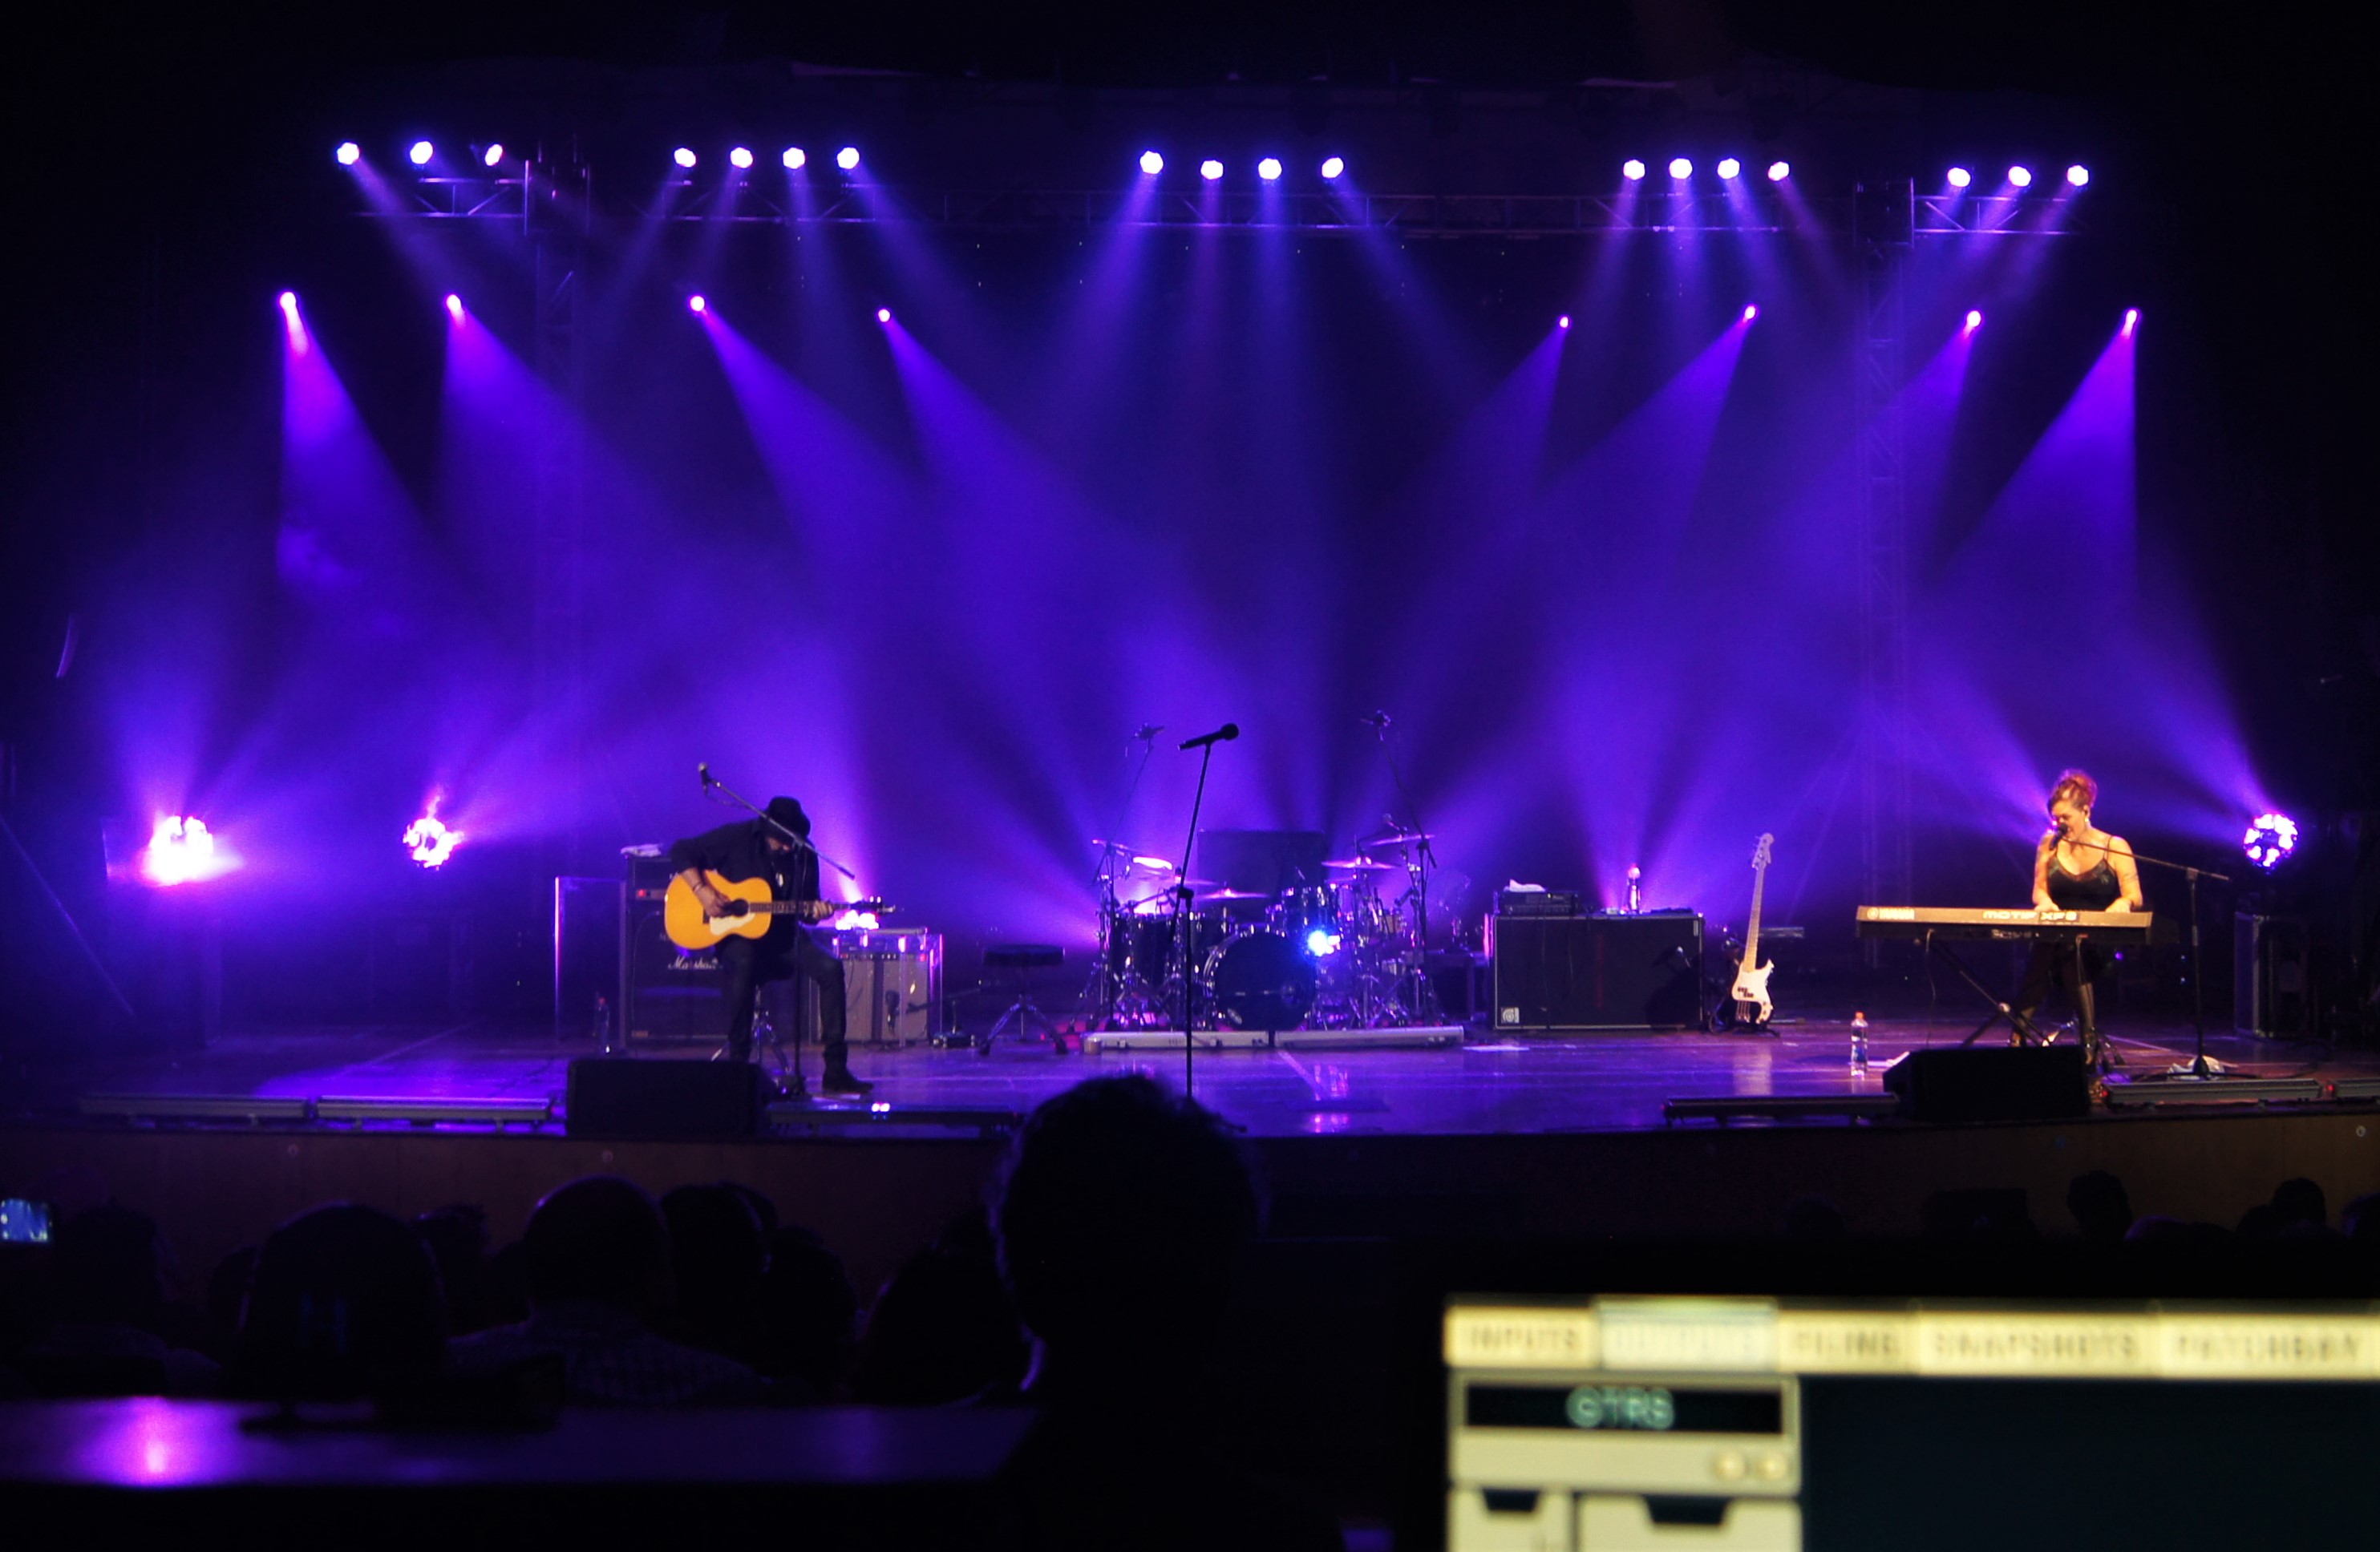 Concert Lighting by Acoustic Control